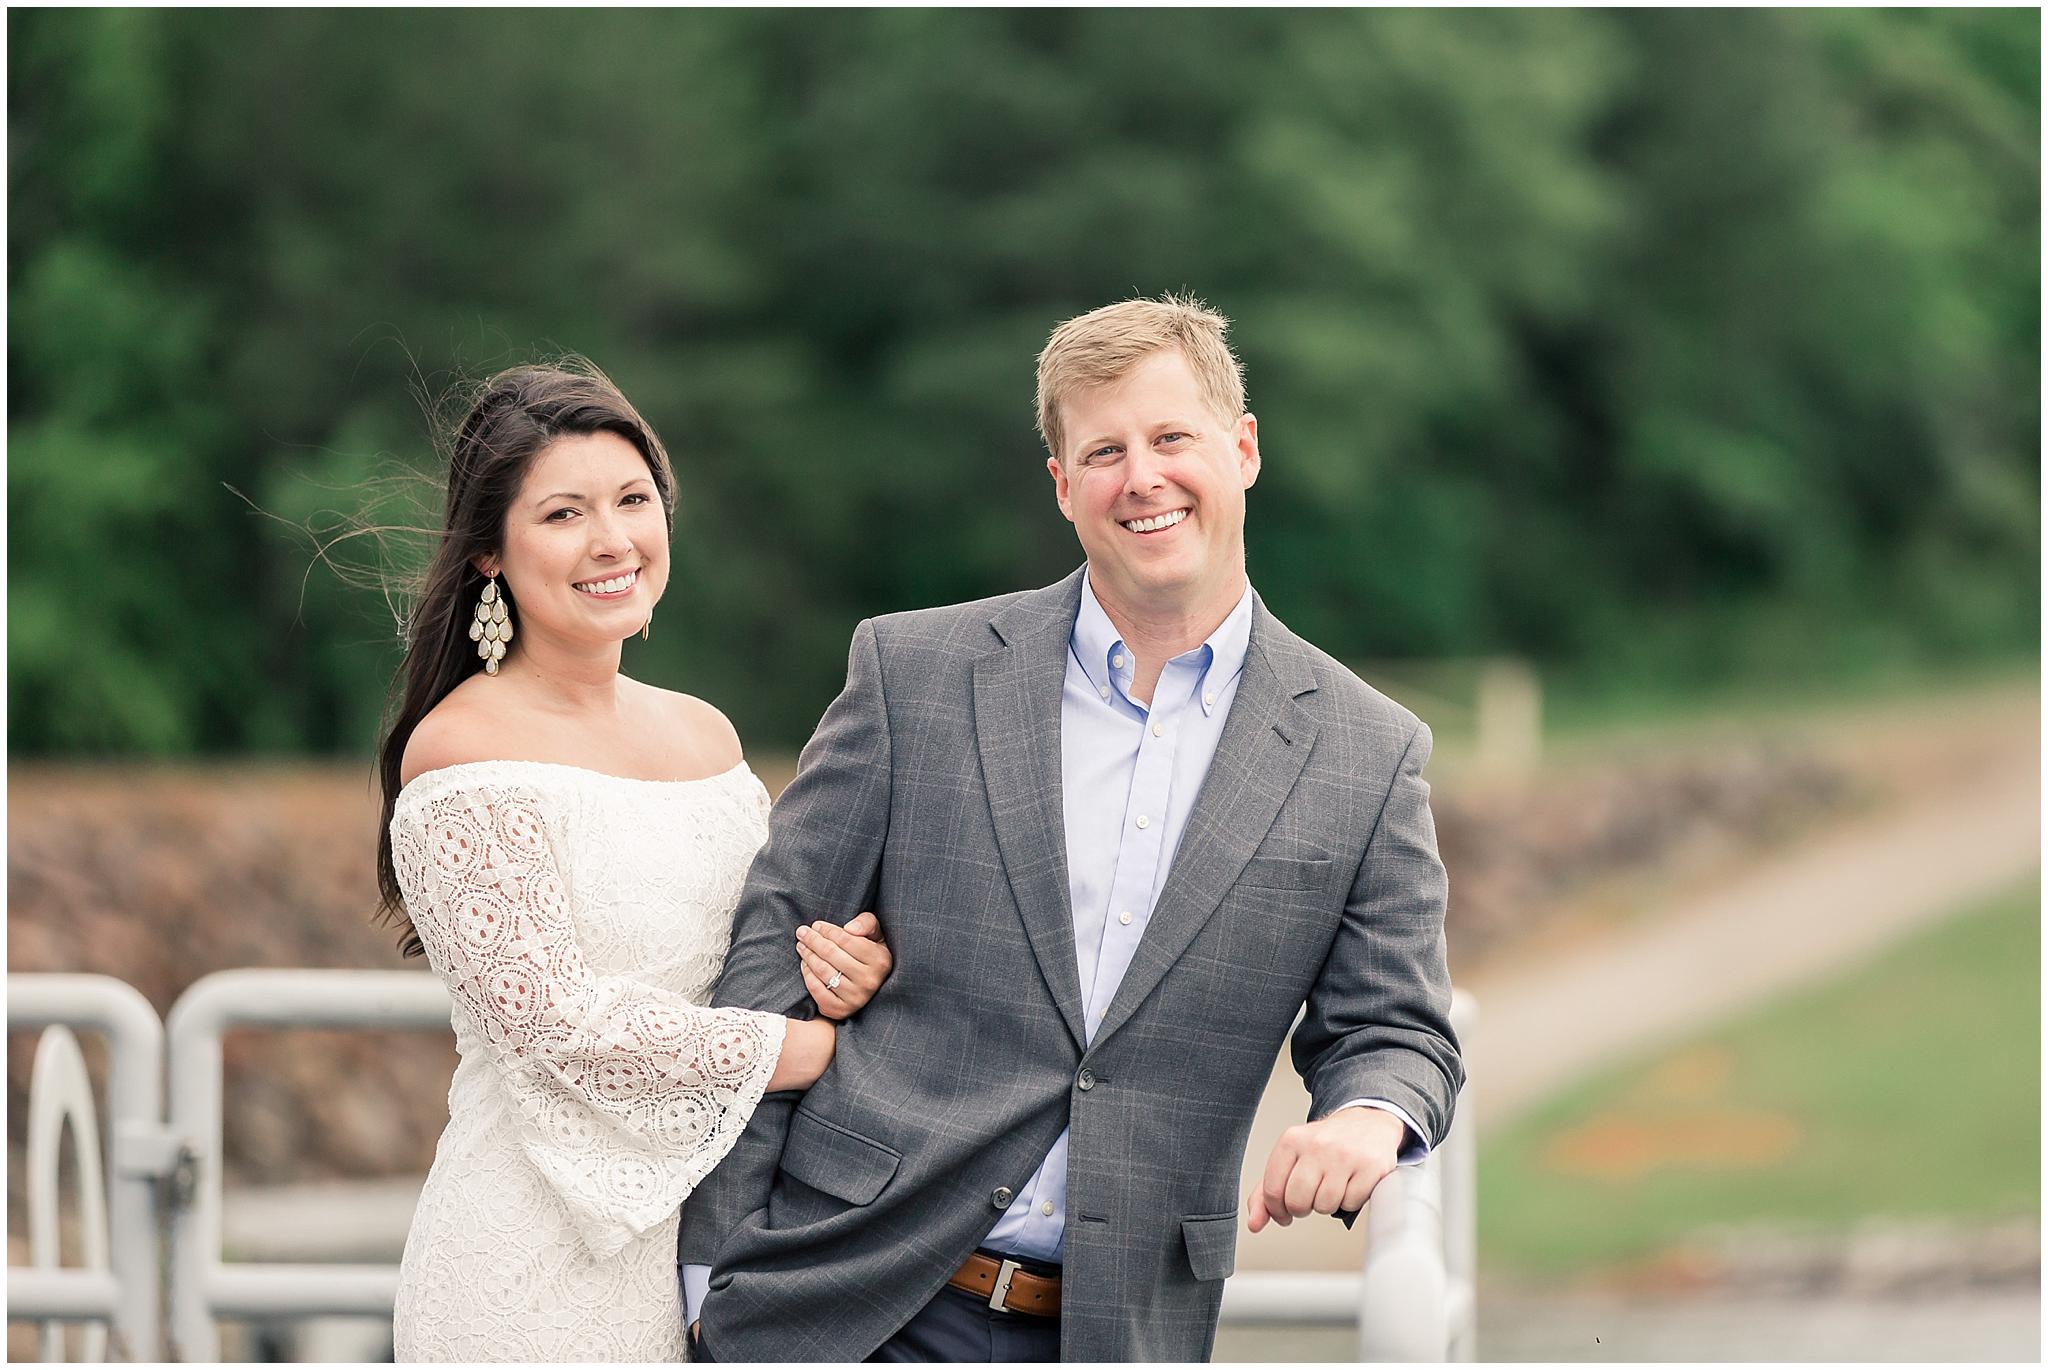 wedding photographers in cleveland ga stormy cloudy wedding pictures